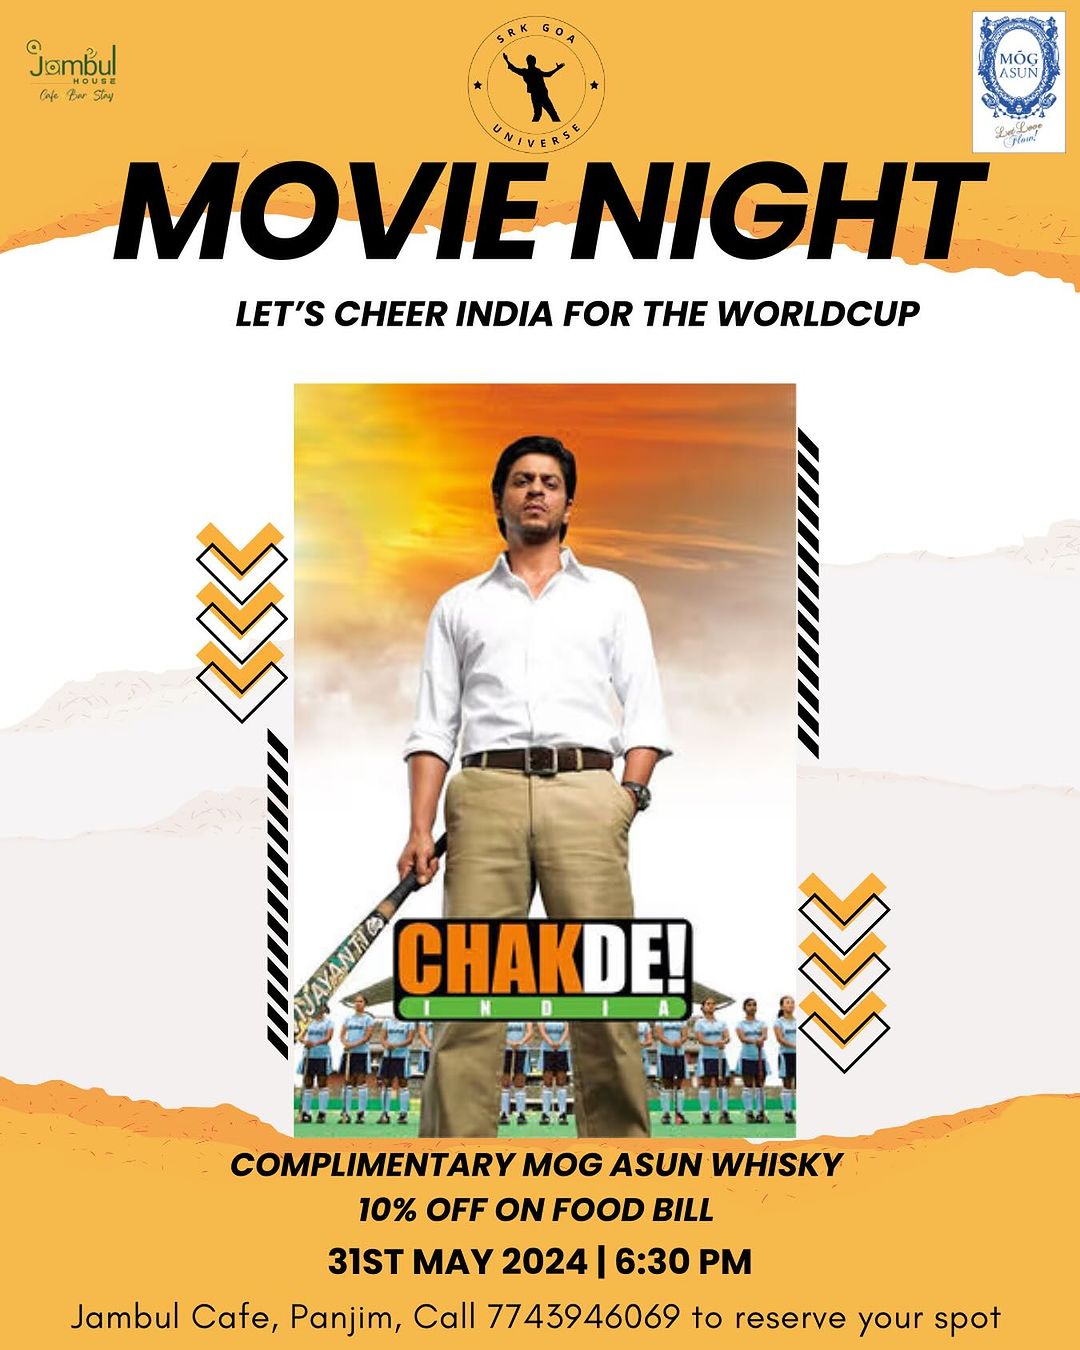 Jambul Movie Night: Cheer India for the World Cup